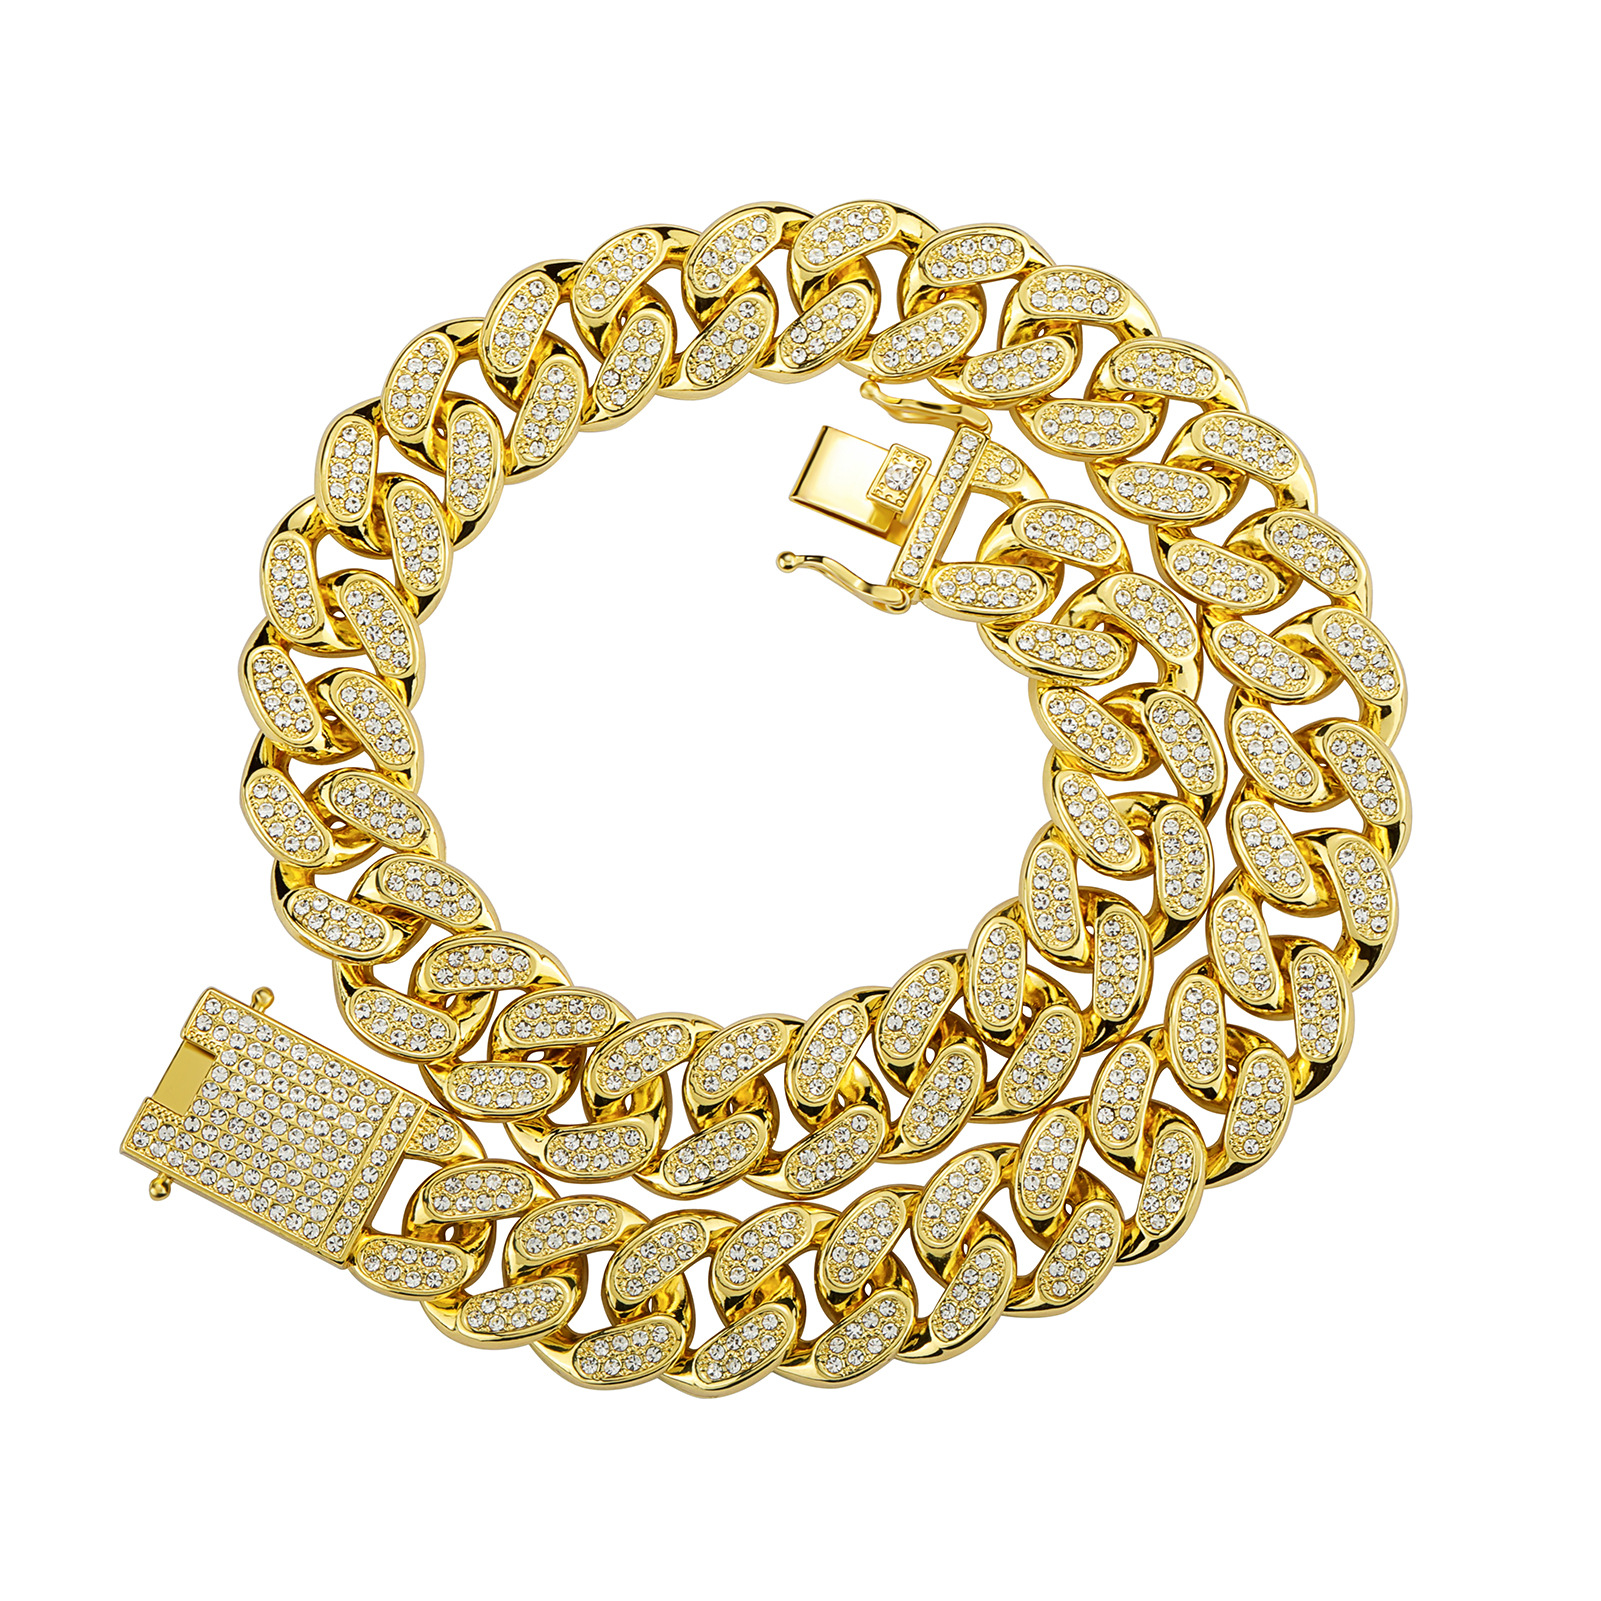 4:Necklace gold 24 inch